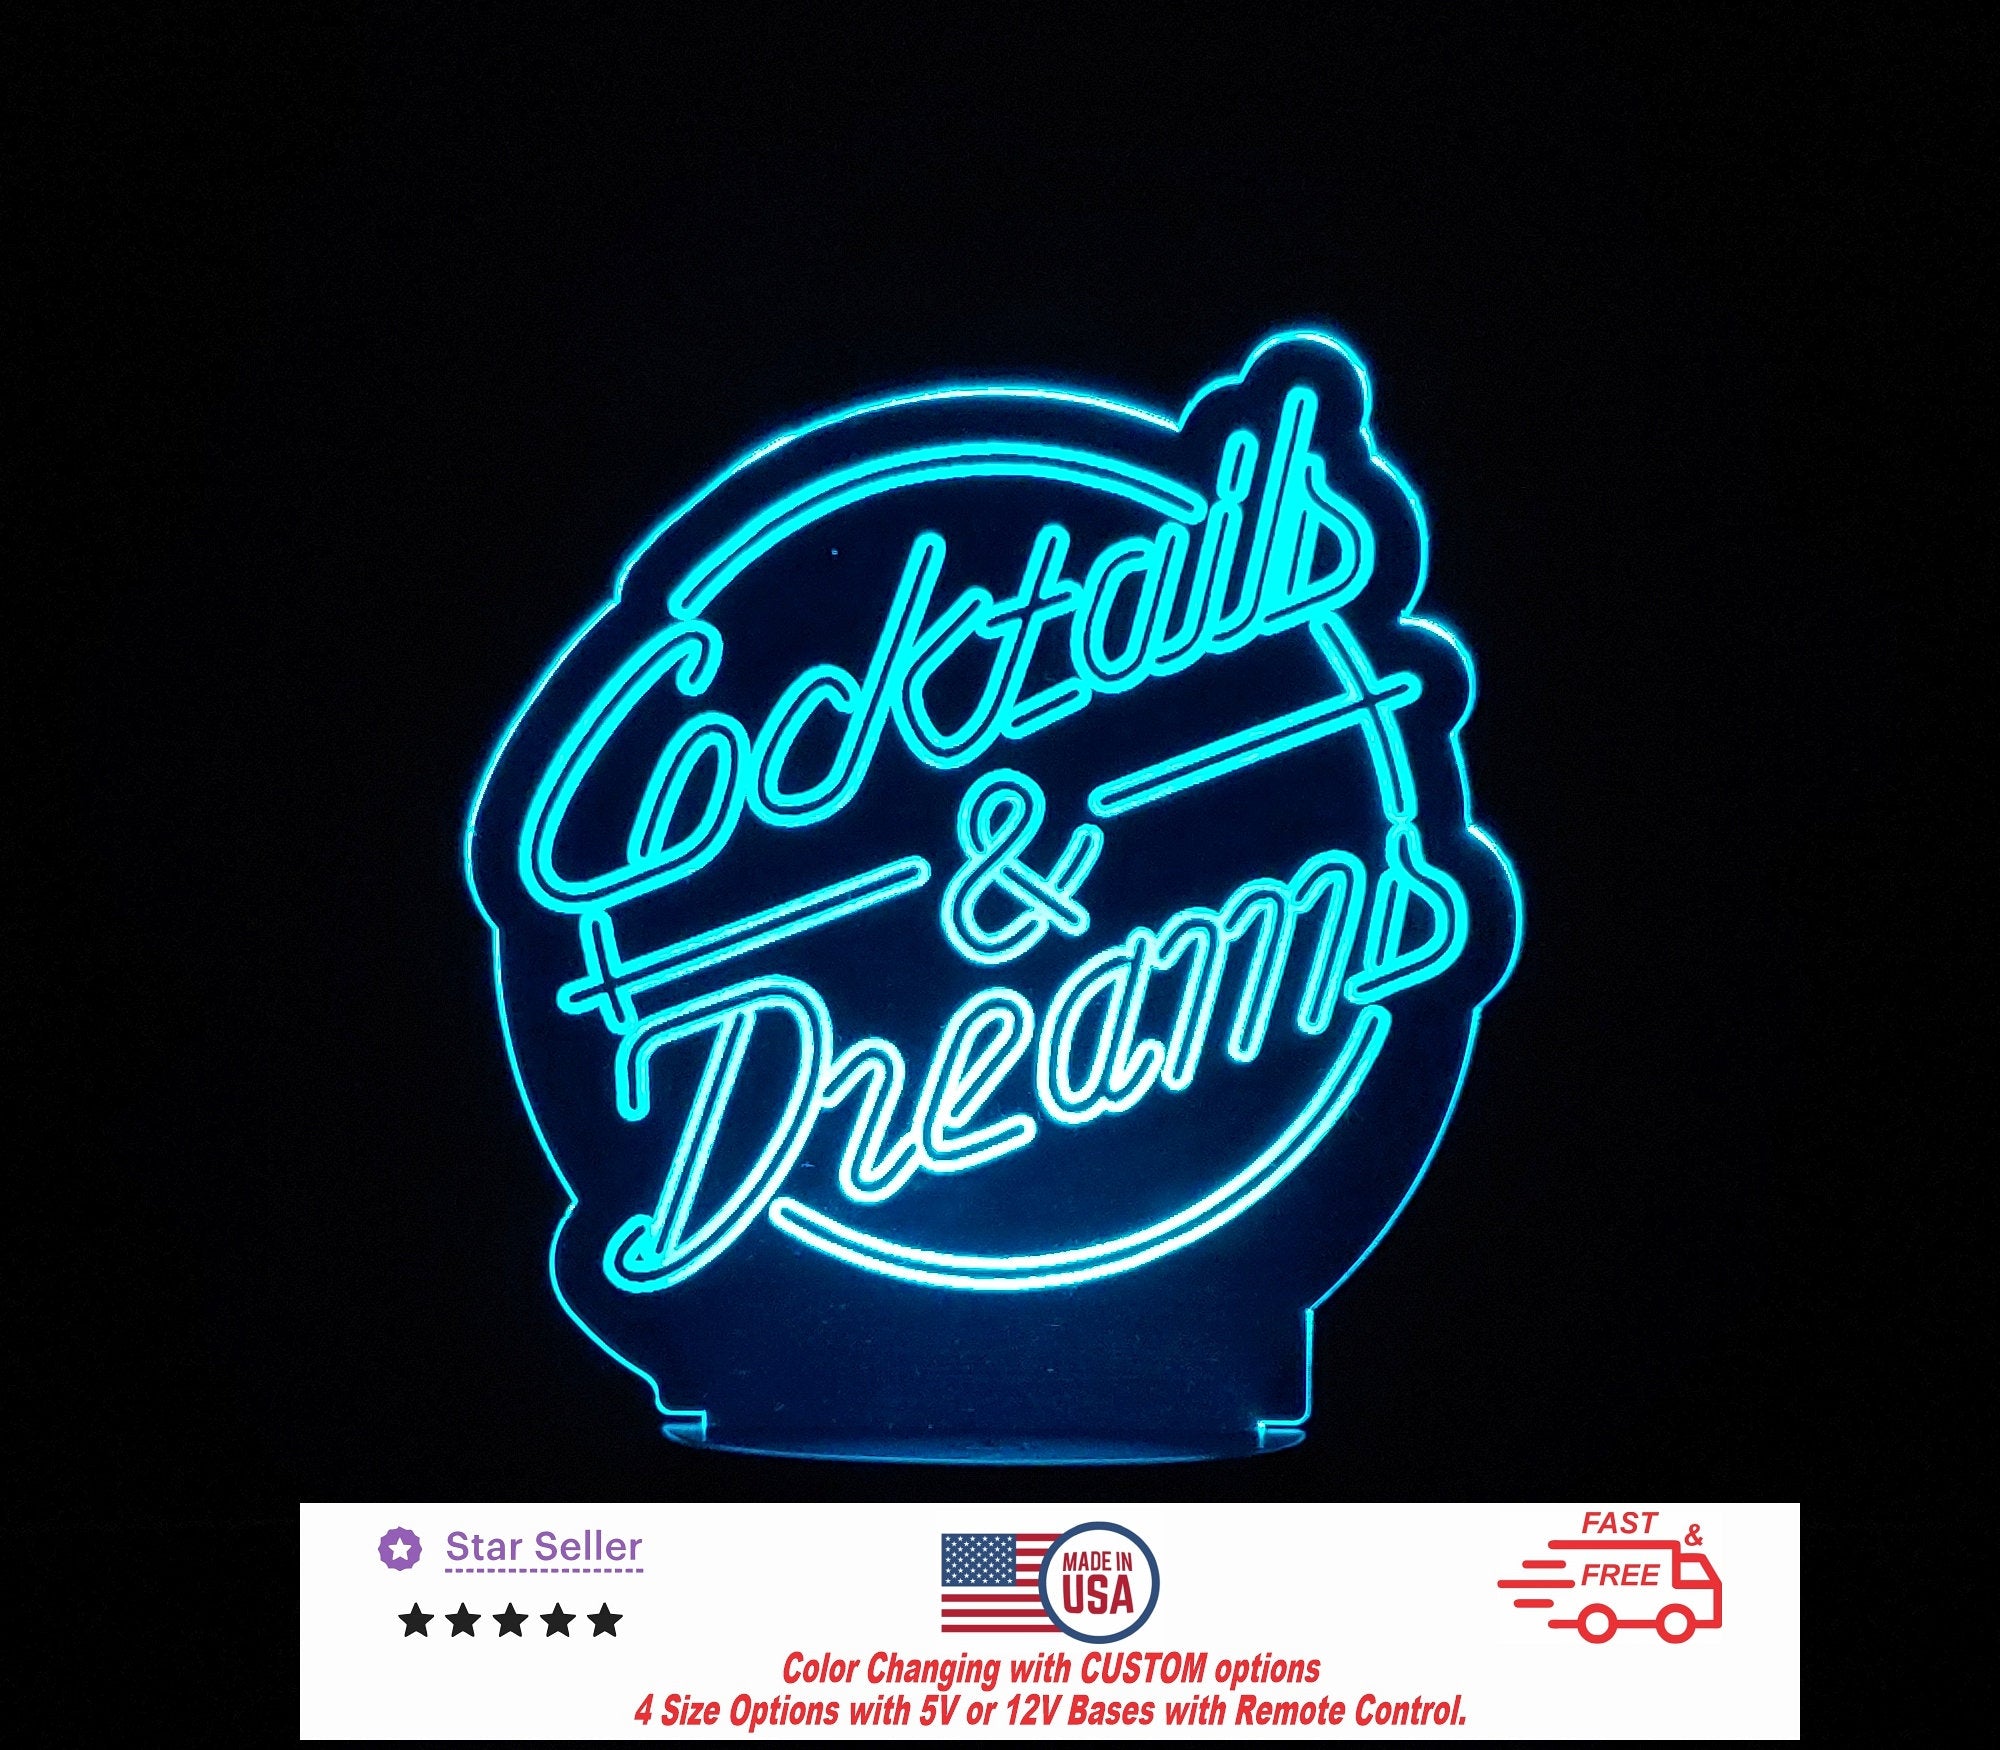 Cocktails and Dreams Bar LED Personalized Night Light, Custom Neon Bar Sign - Cocktail & Dreams Sign - 4 Sizes Free Shipping Made in USA